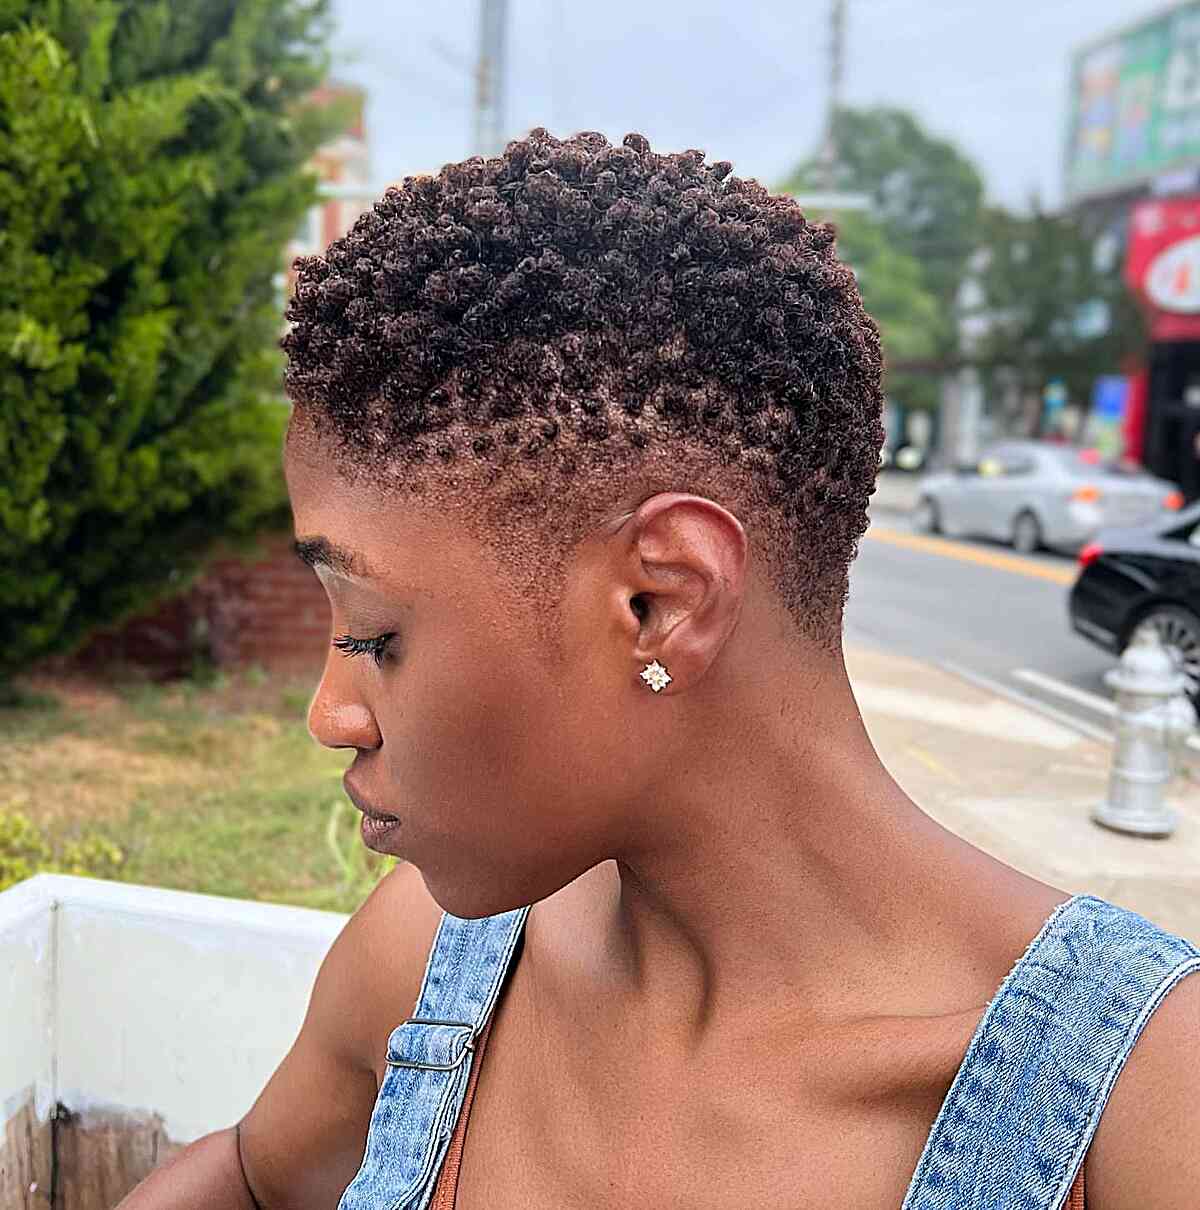 Edgy Tapered Fro for Naturally Short Hair